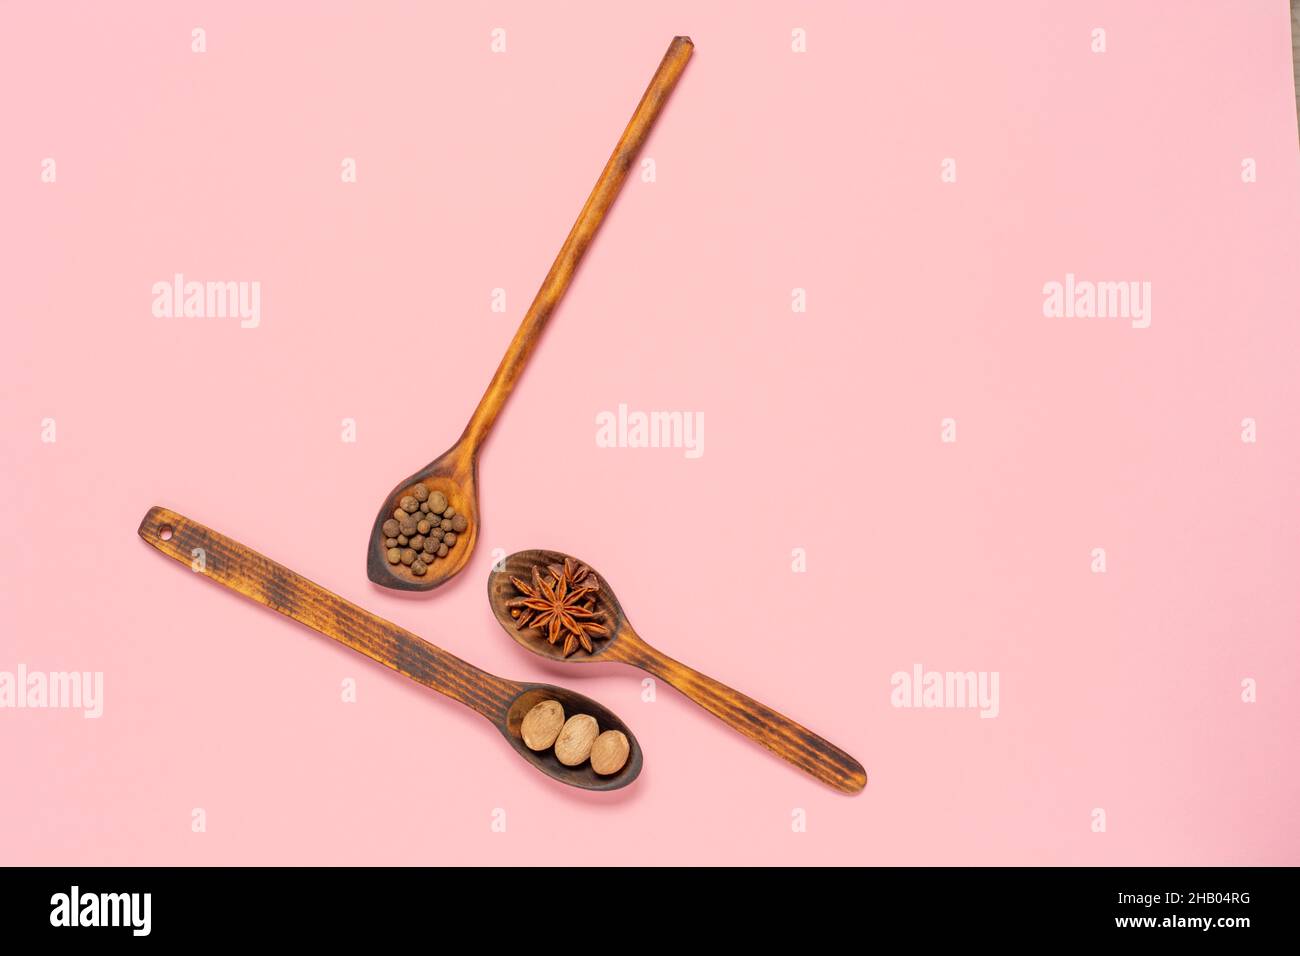 anise star, nutmeg and allspice in spoon on colorful background with copy space. Flat lay background. Stock Photo